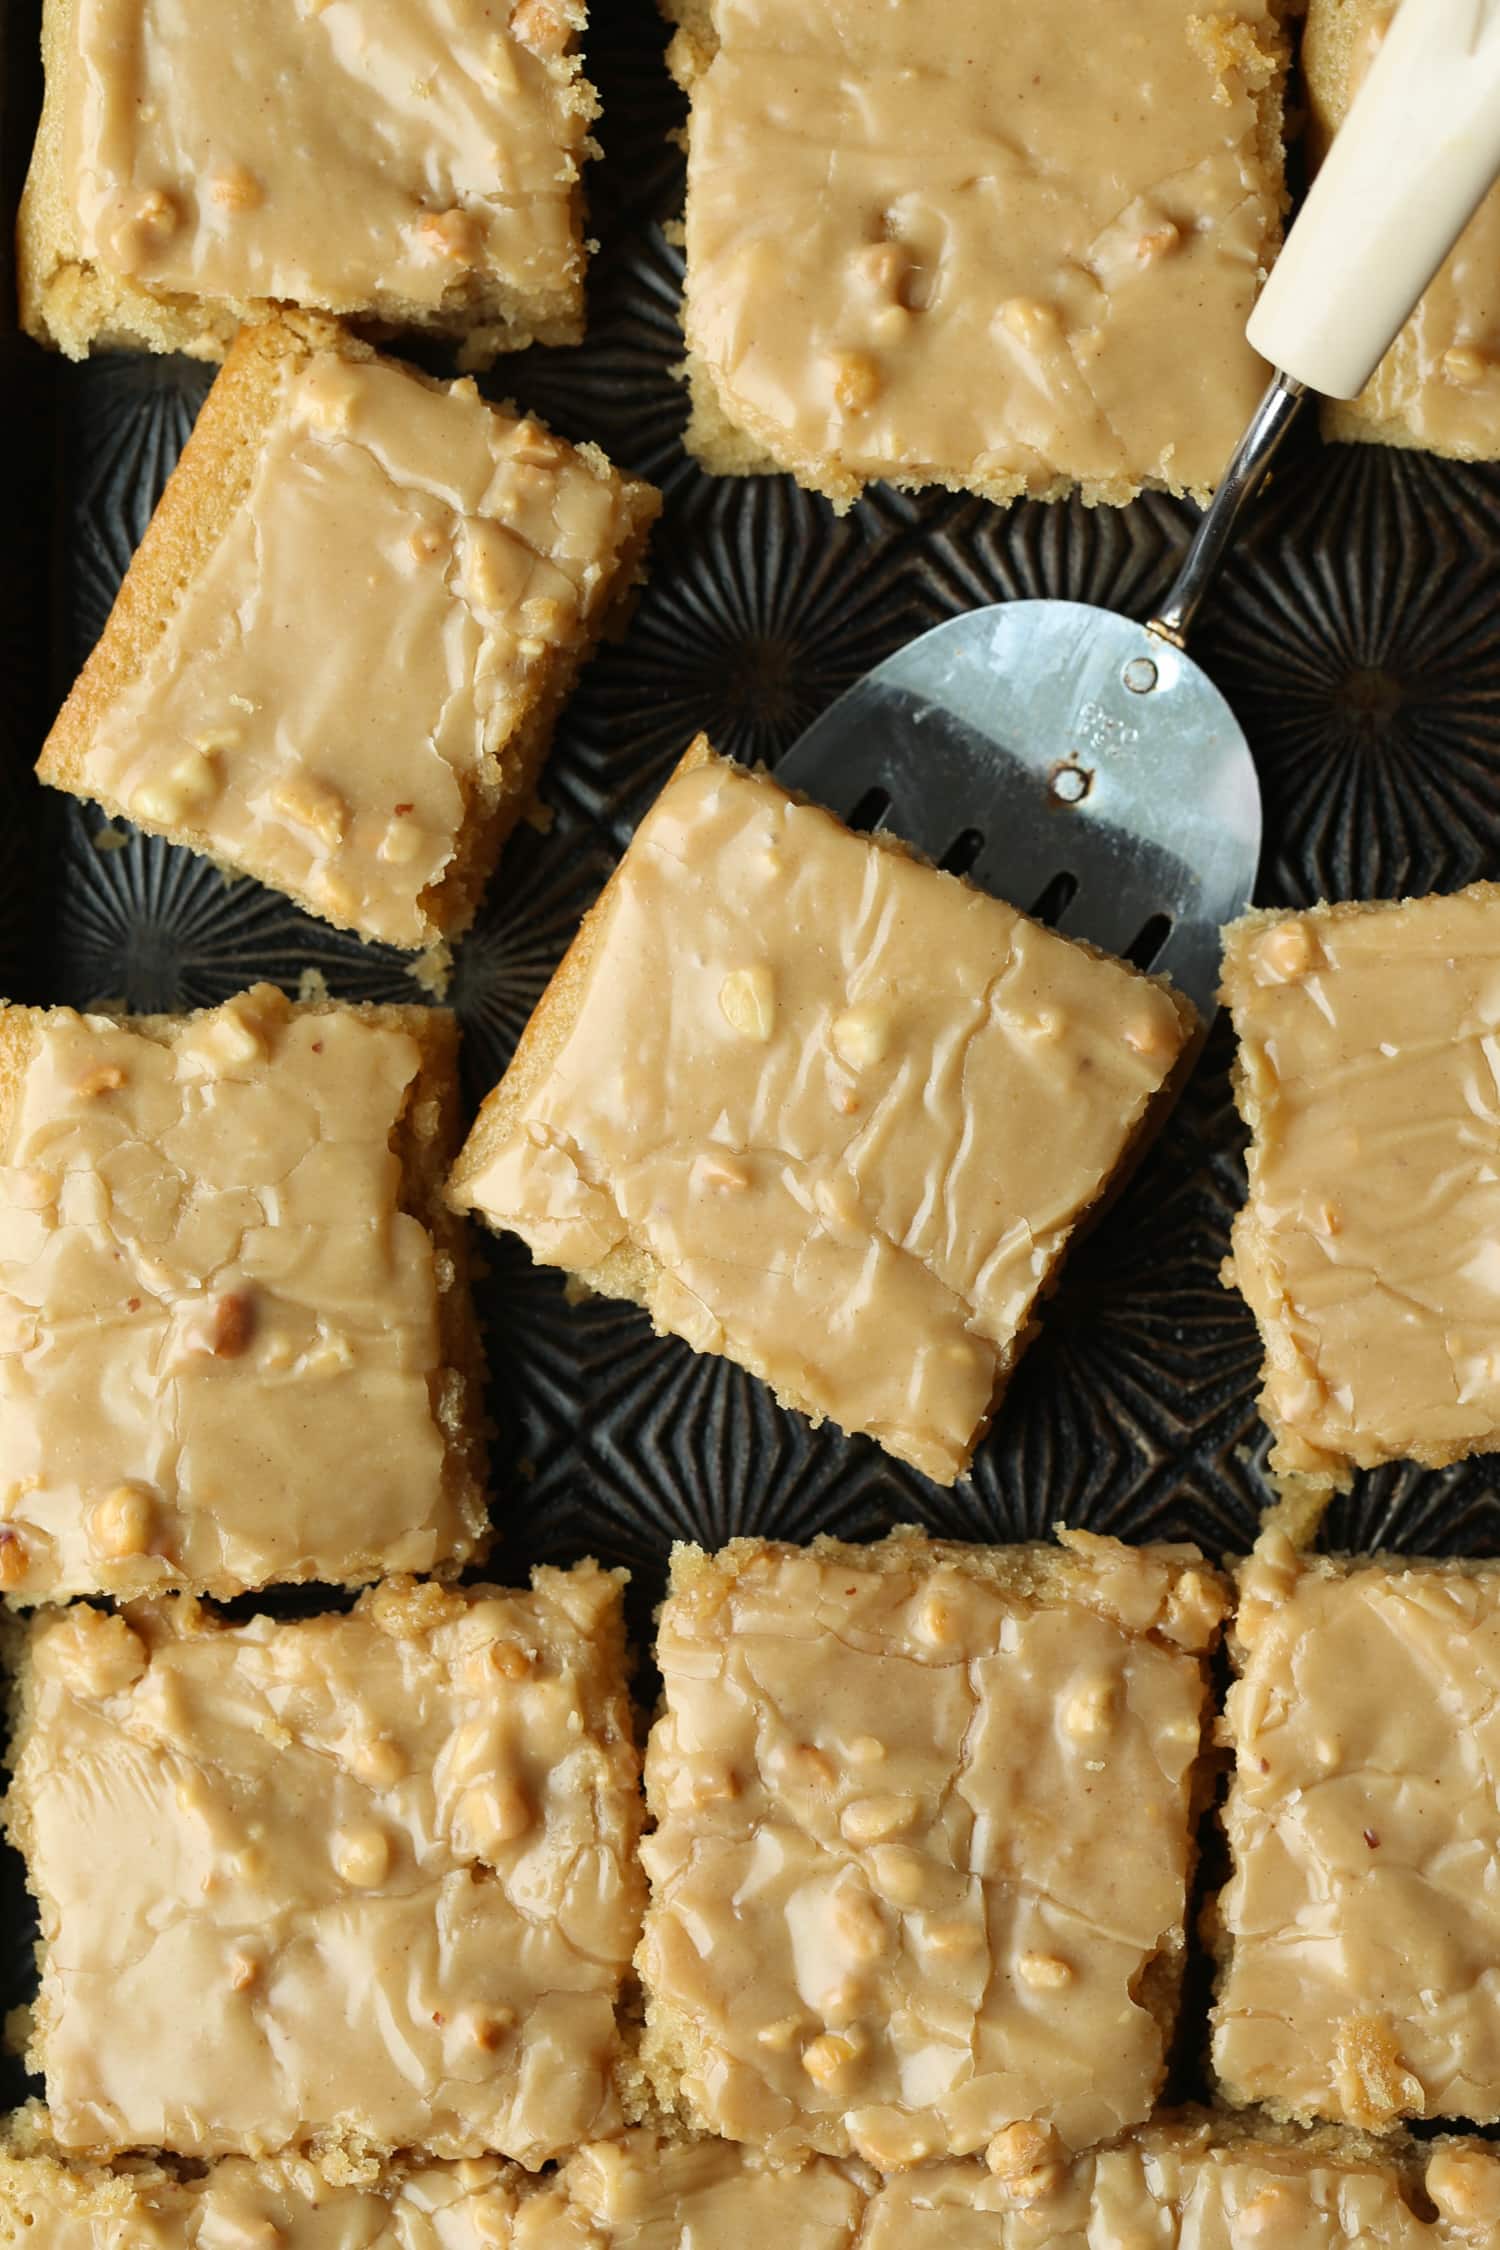 Slices of peanut butter sheet cake with peanut butter frosting.